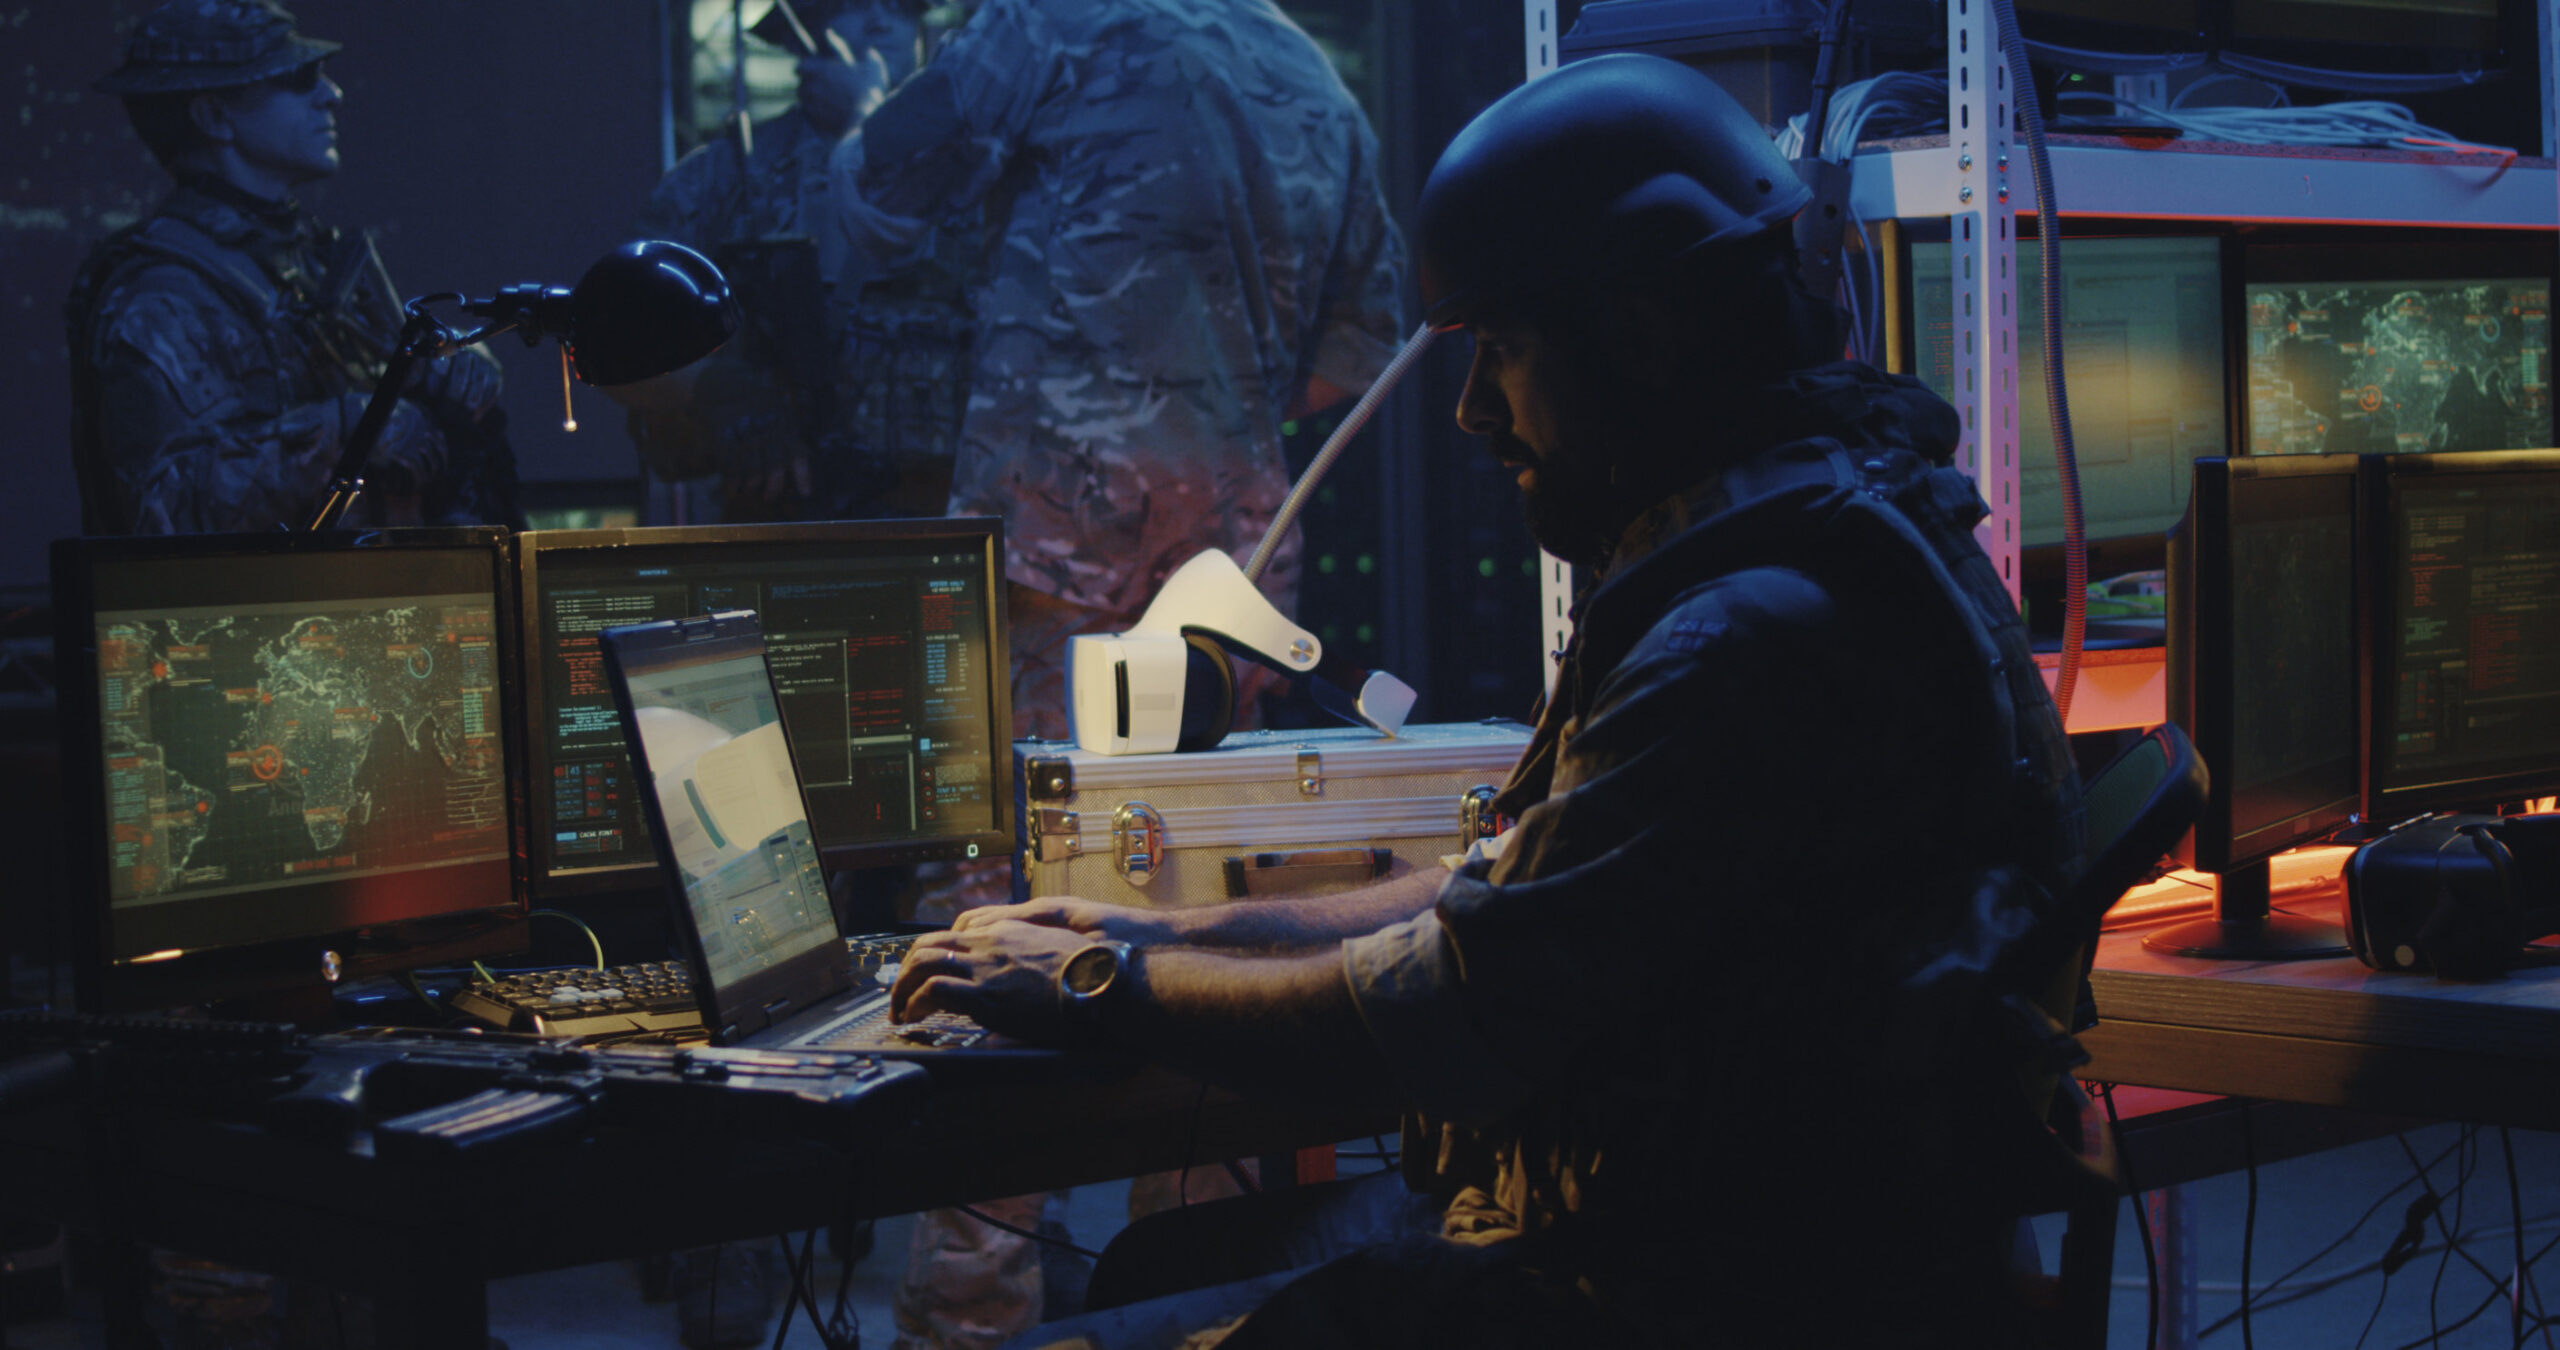 Medium shot of a soldier working on a laptop in full combat gear